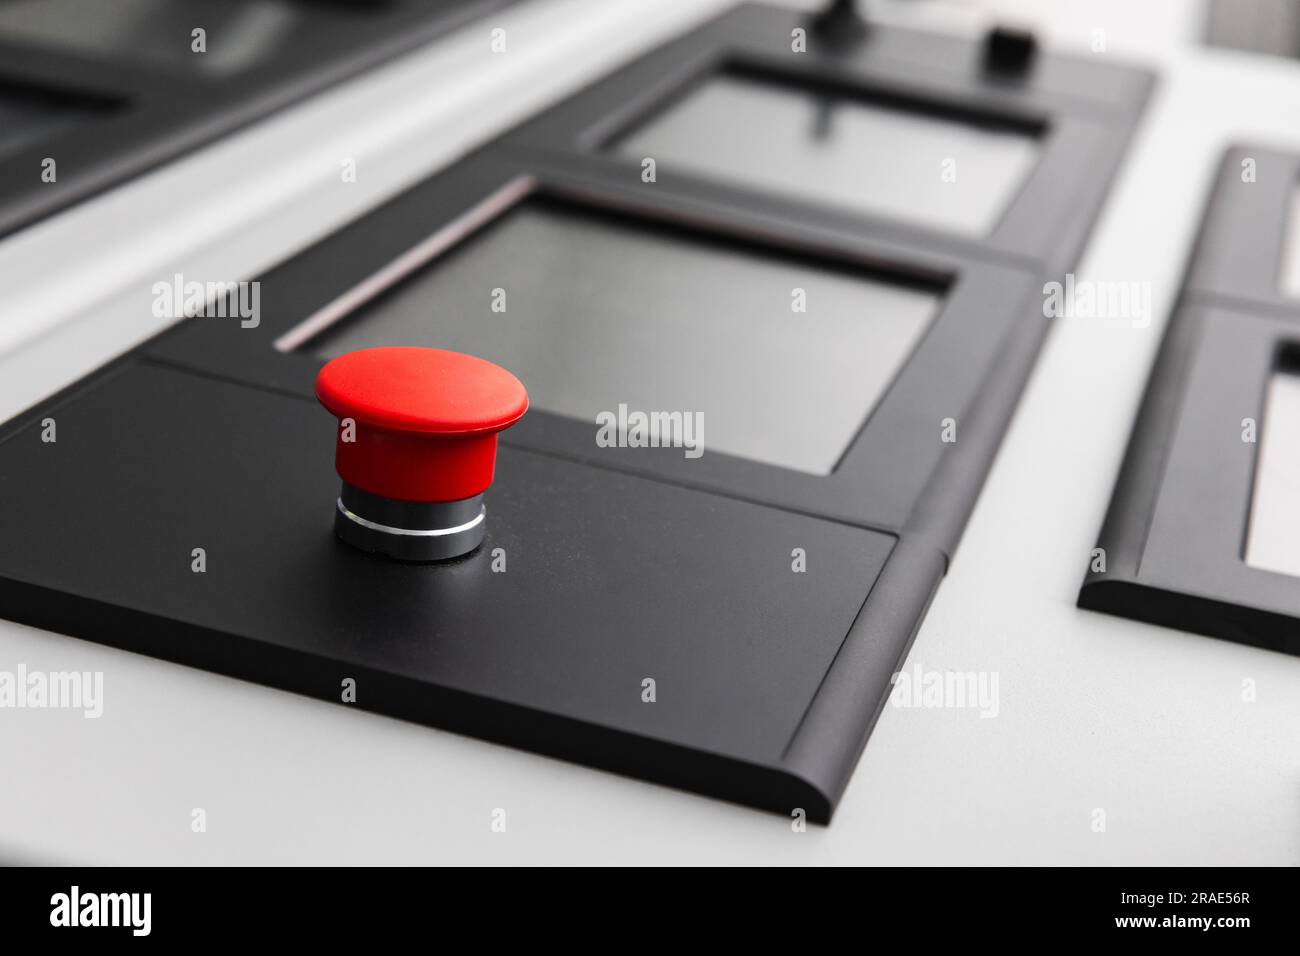 Red button and sensor screens on a modern ship control panel, captain bridge equipment. Close-up photo with selective focus Stock Photo